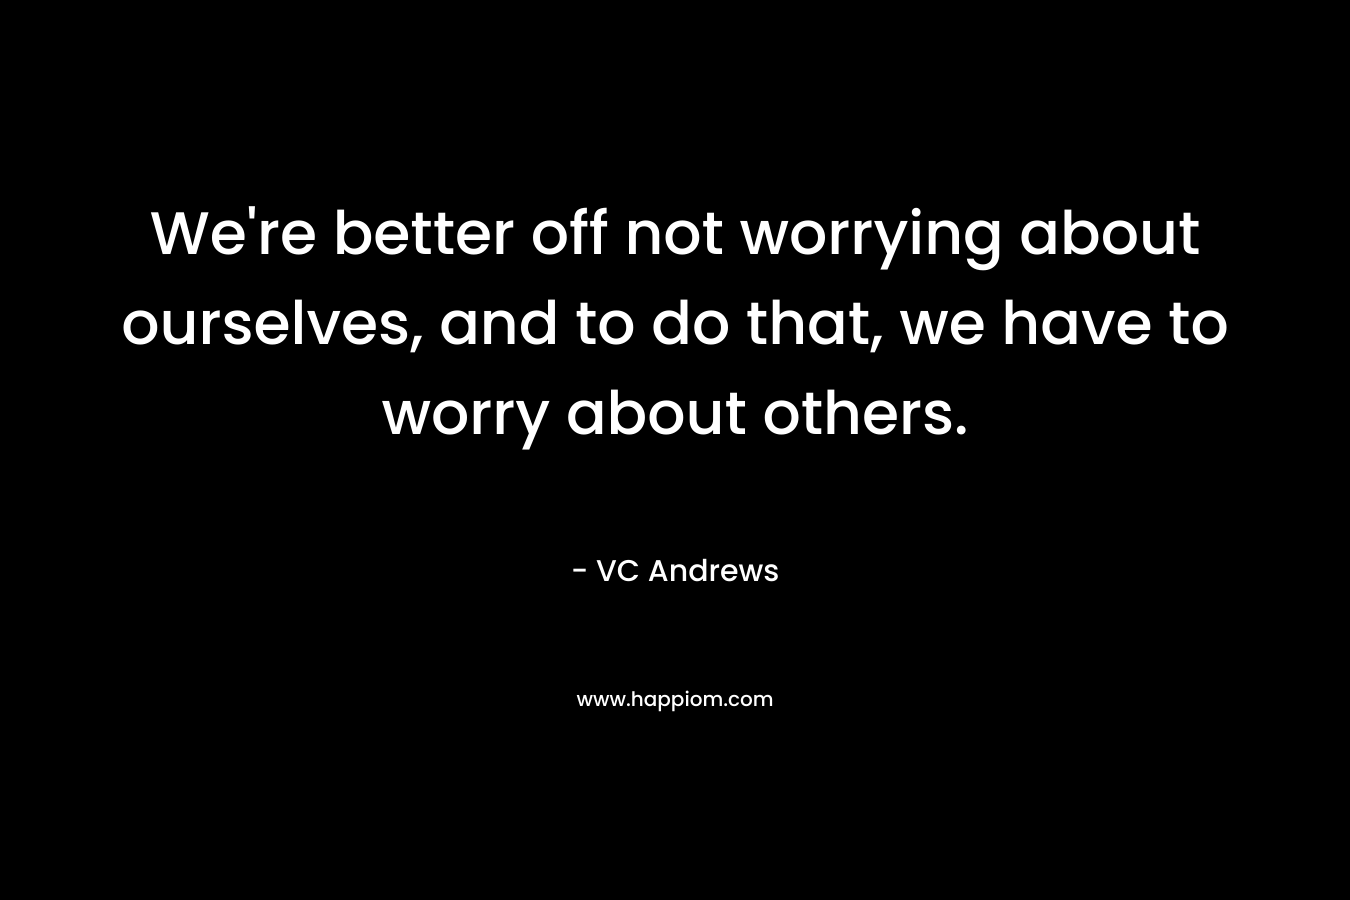 We’re better off not worrying about ourselves, and to do that, we have to worry about others. – VC Andrews